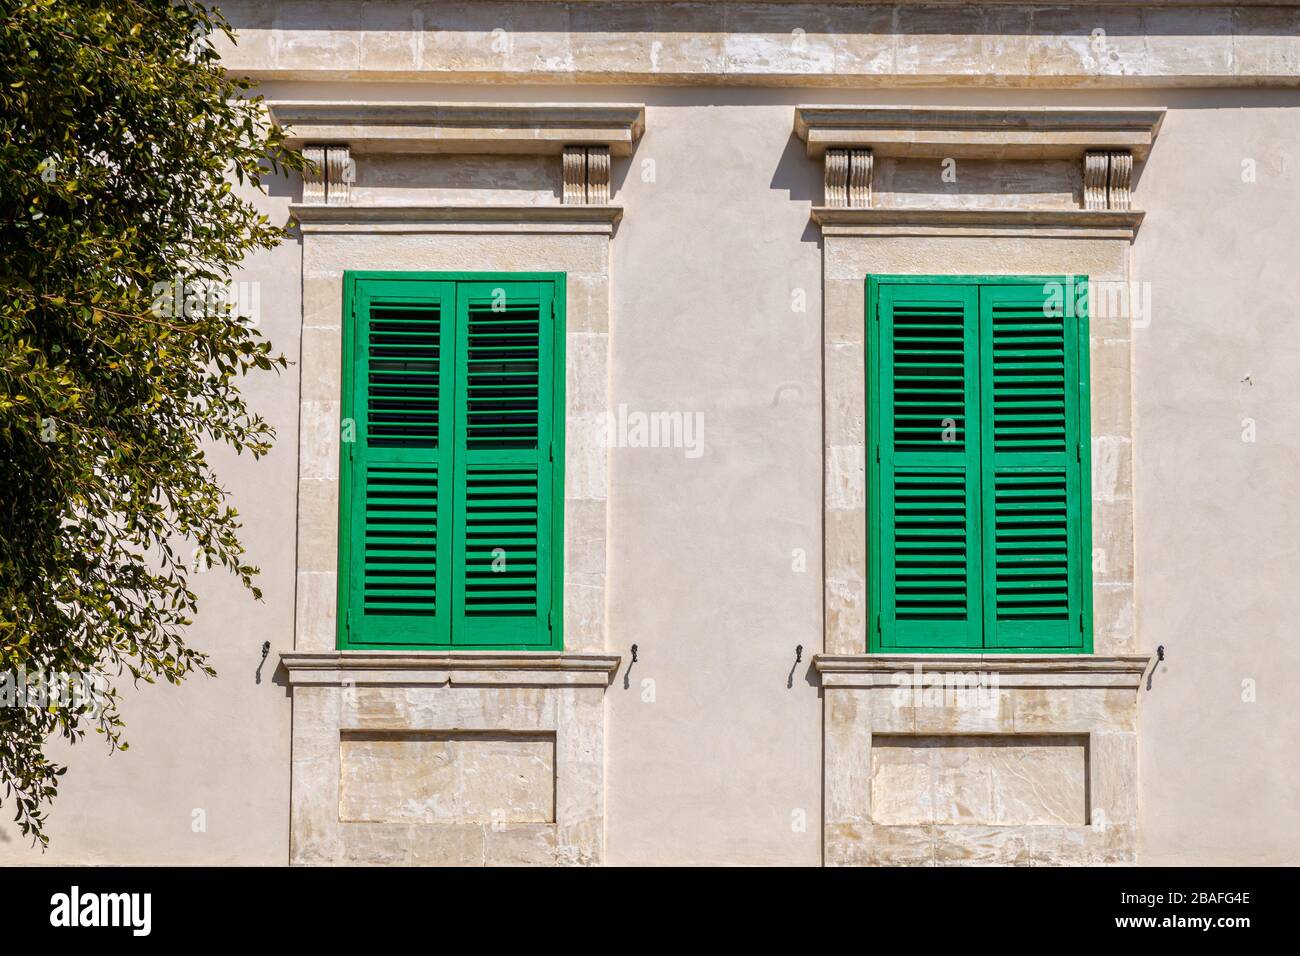 windows in the facades of ancient medieval houses Stock Photo